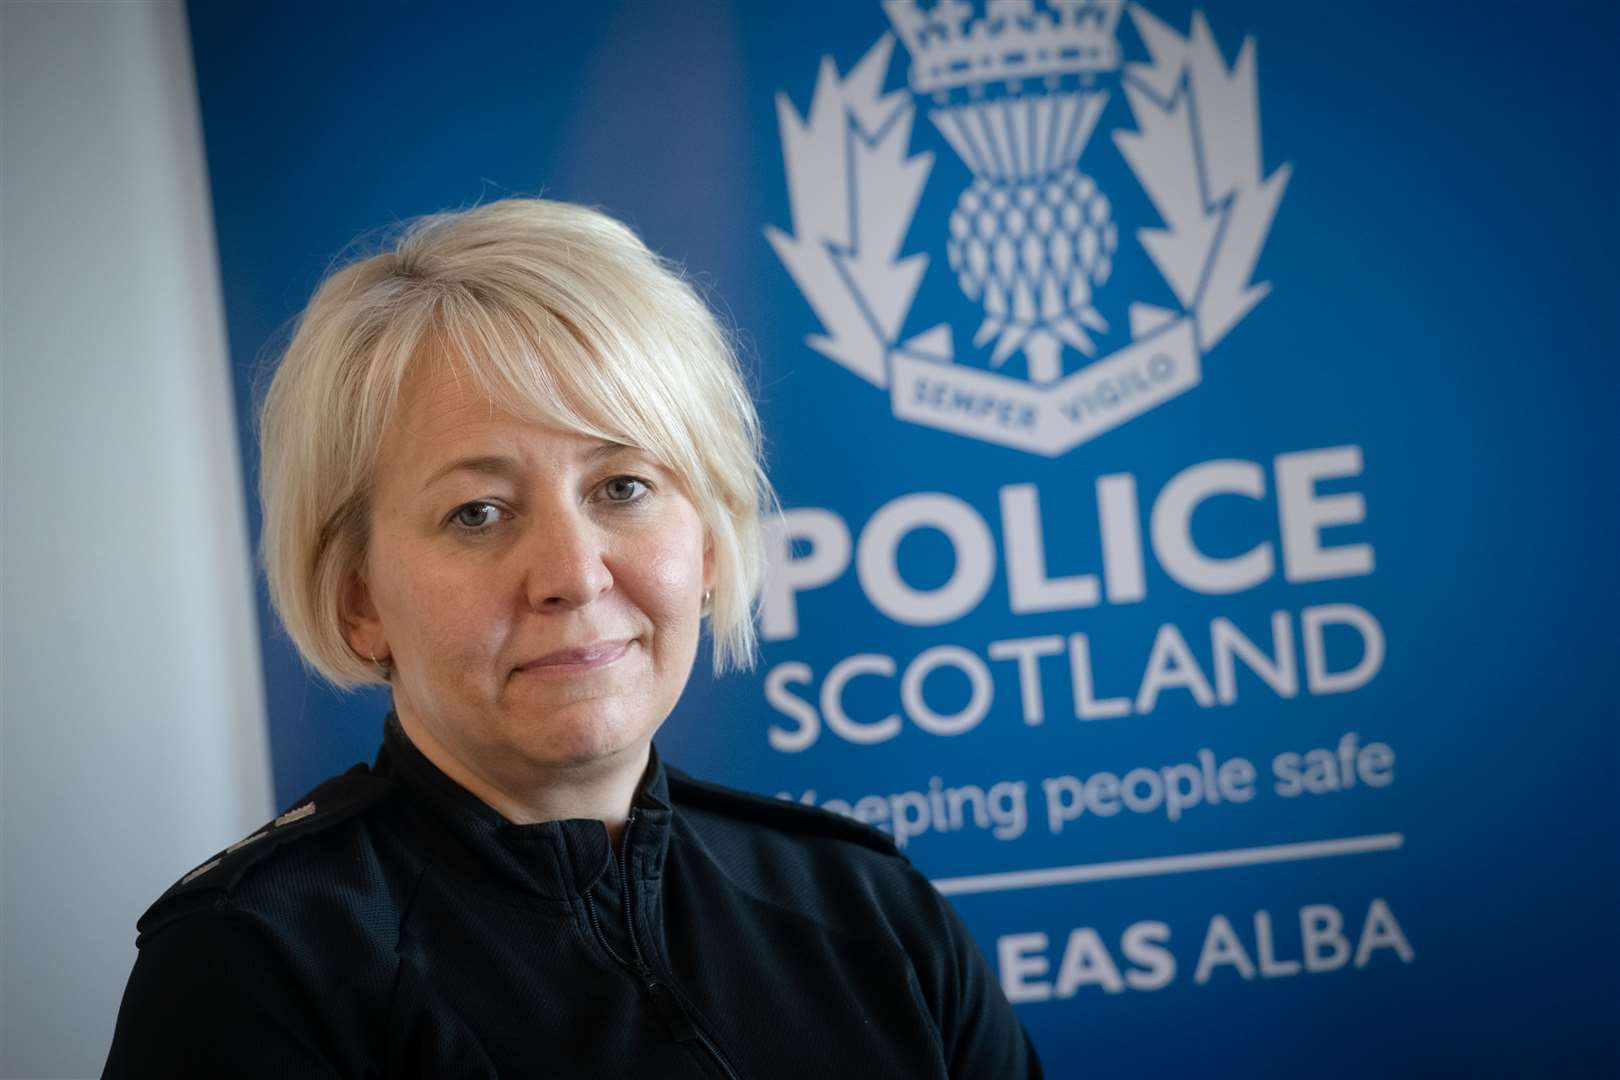 Chief Inspector Judy Hill says the police are working with other organisations to support those who are vulnerable.